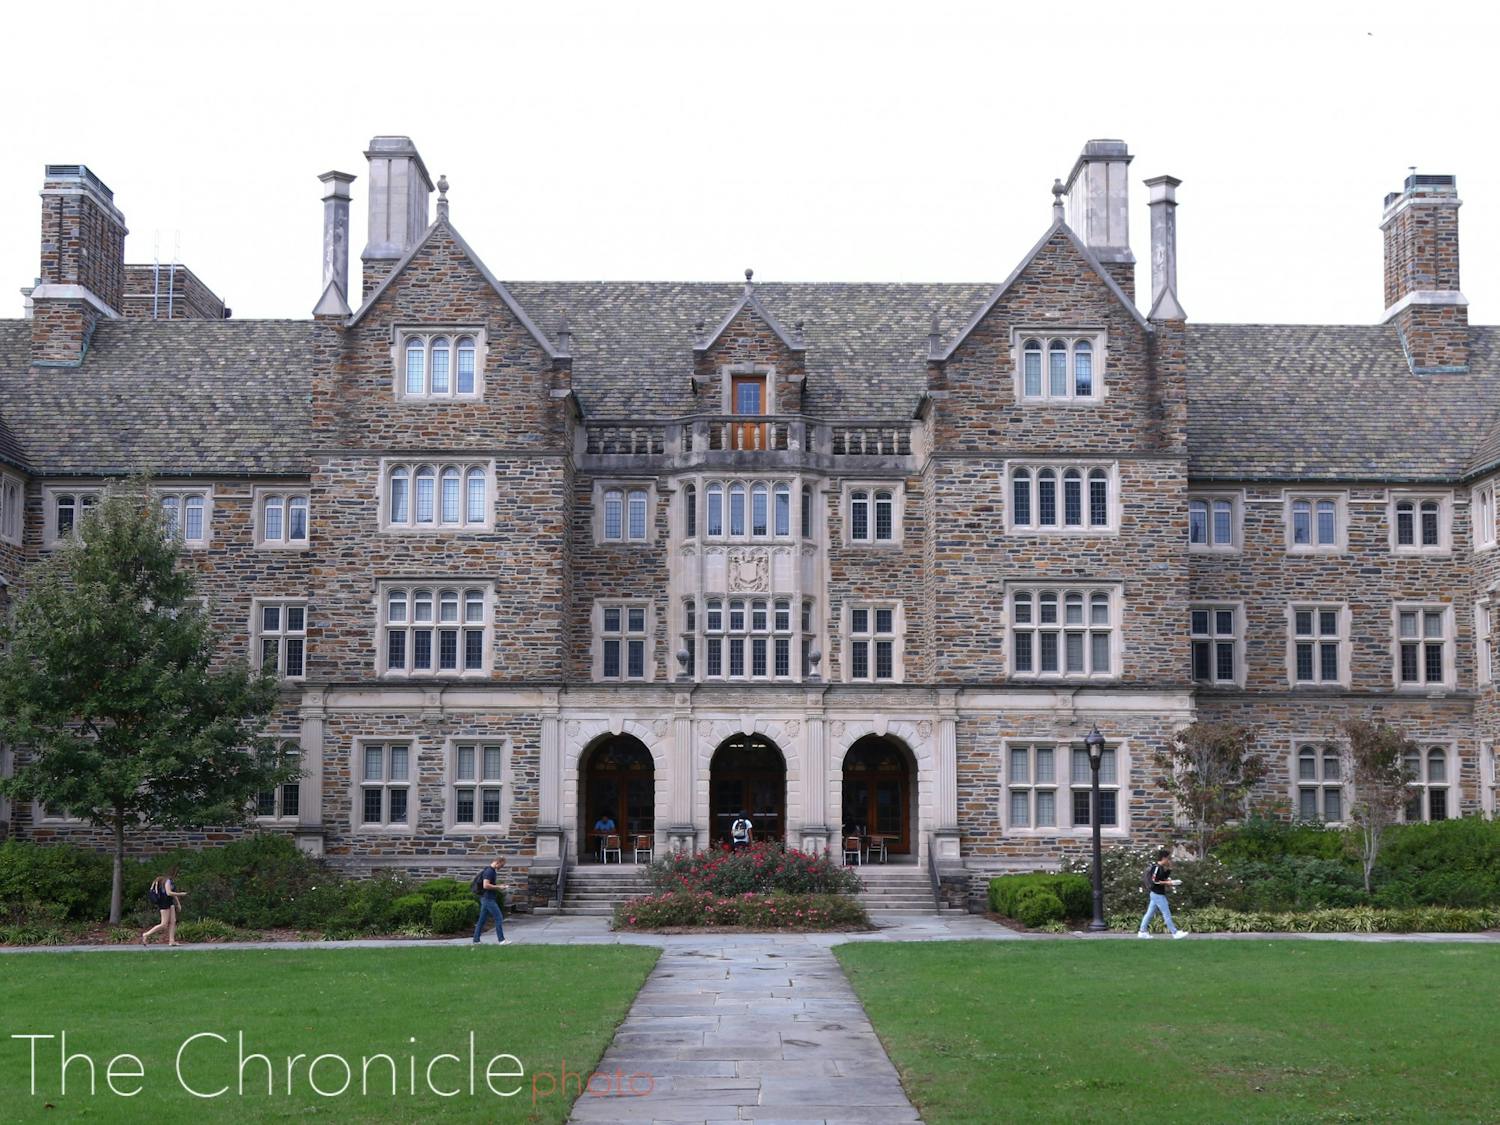 Duke recently implemented new Title IX rules, and students have raised questions about the transparency of the process.